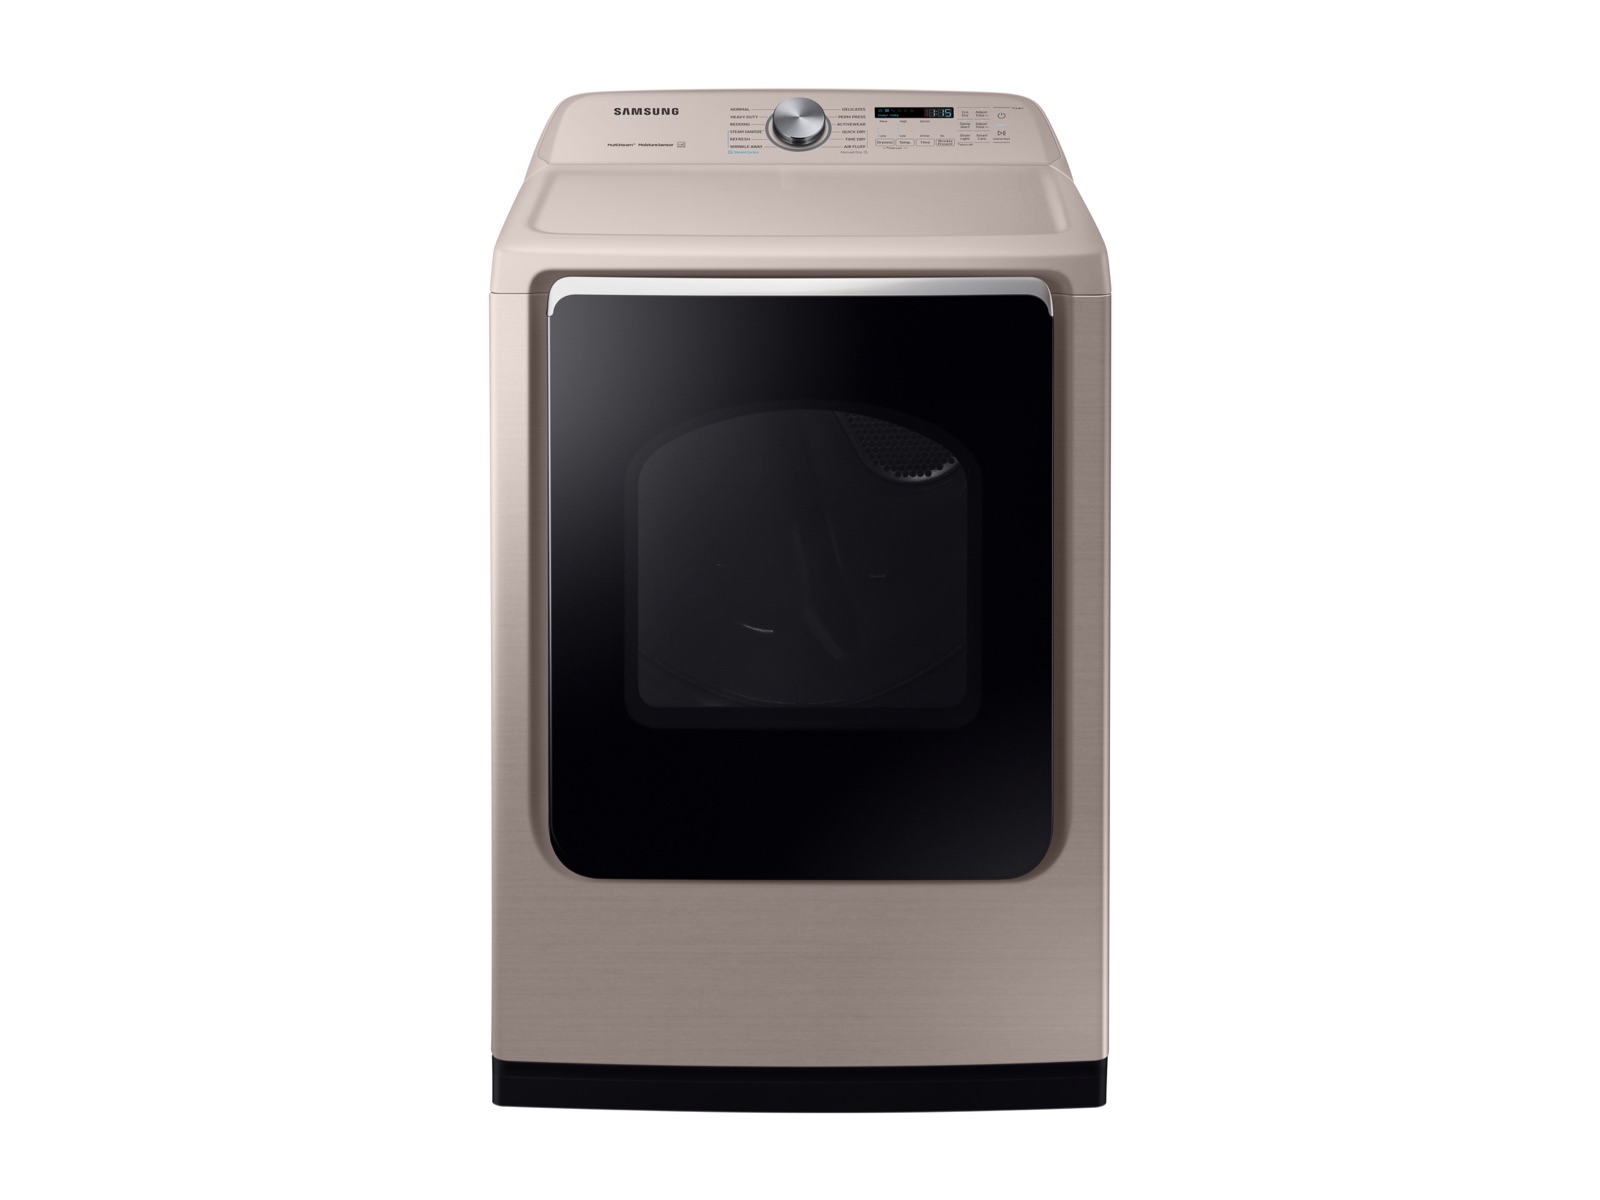 Photos - Tumble Dryer Samsung 7.4 cu. ft. Gas Dryer with Steam Sanitize+ in Champagne(DVG54R7600 